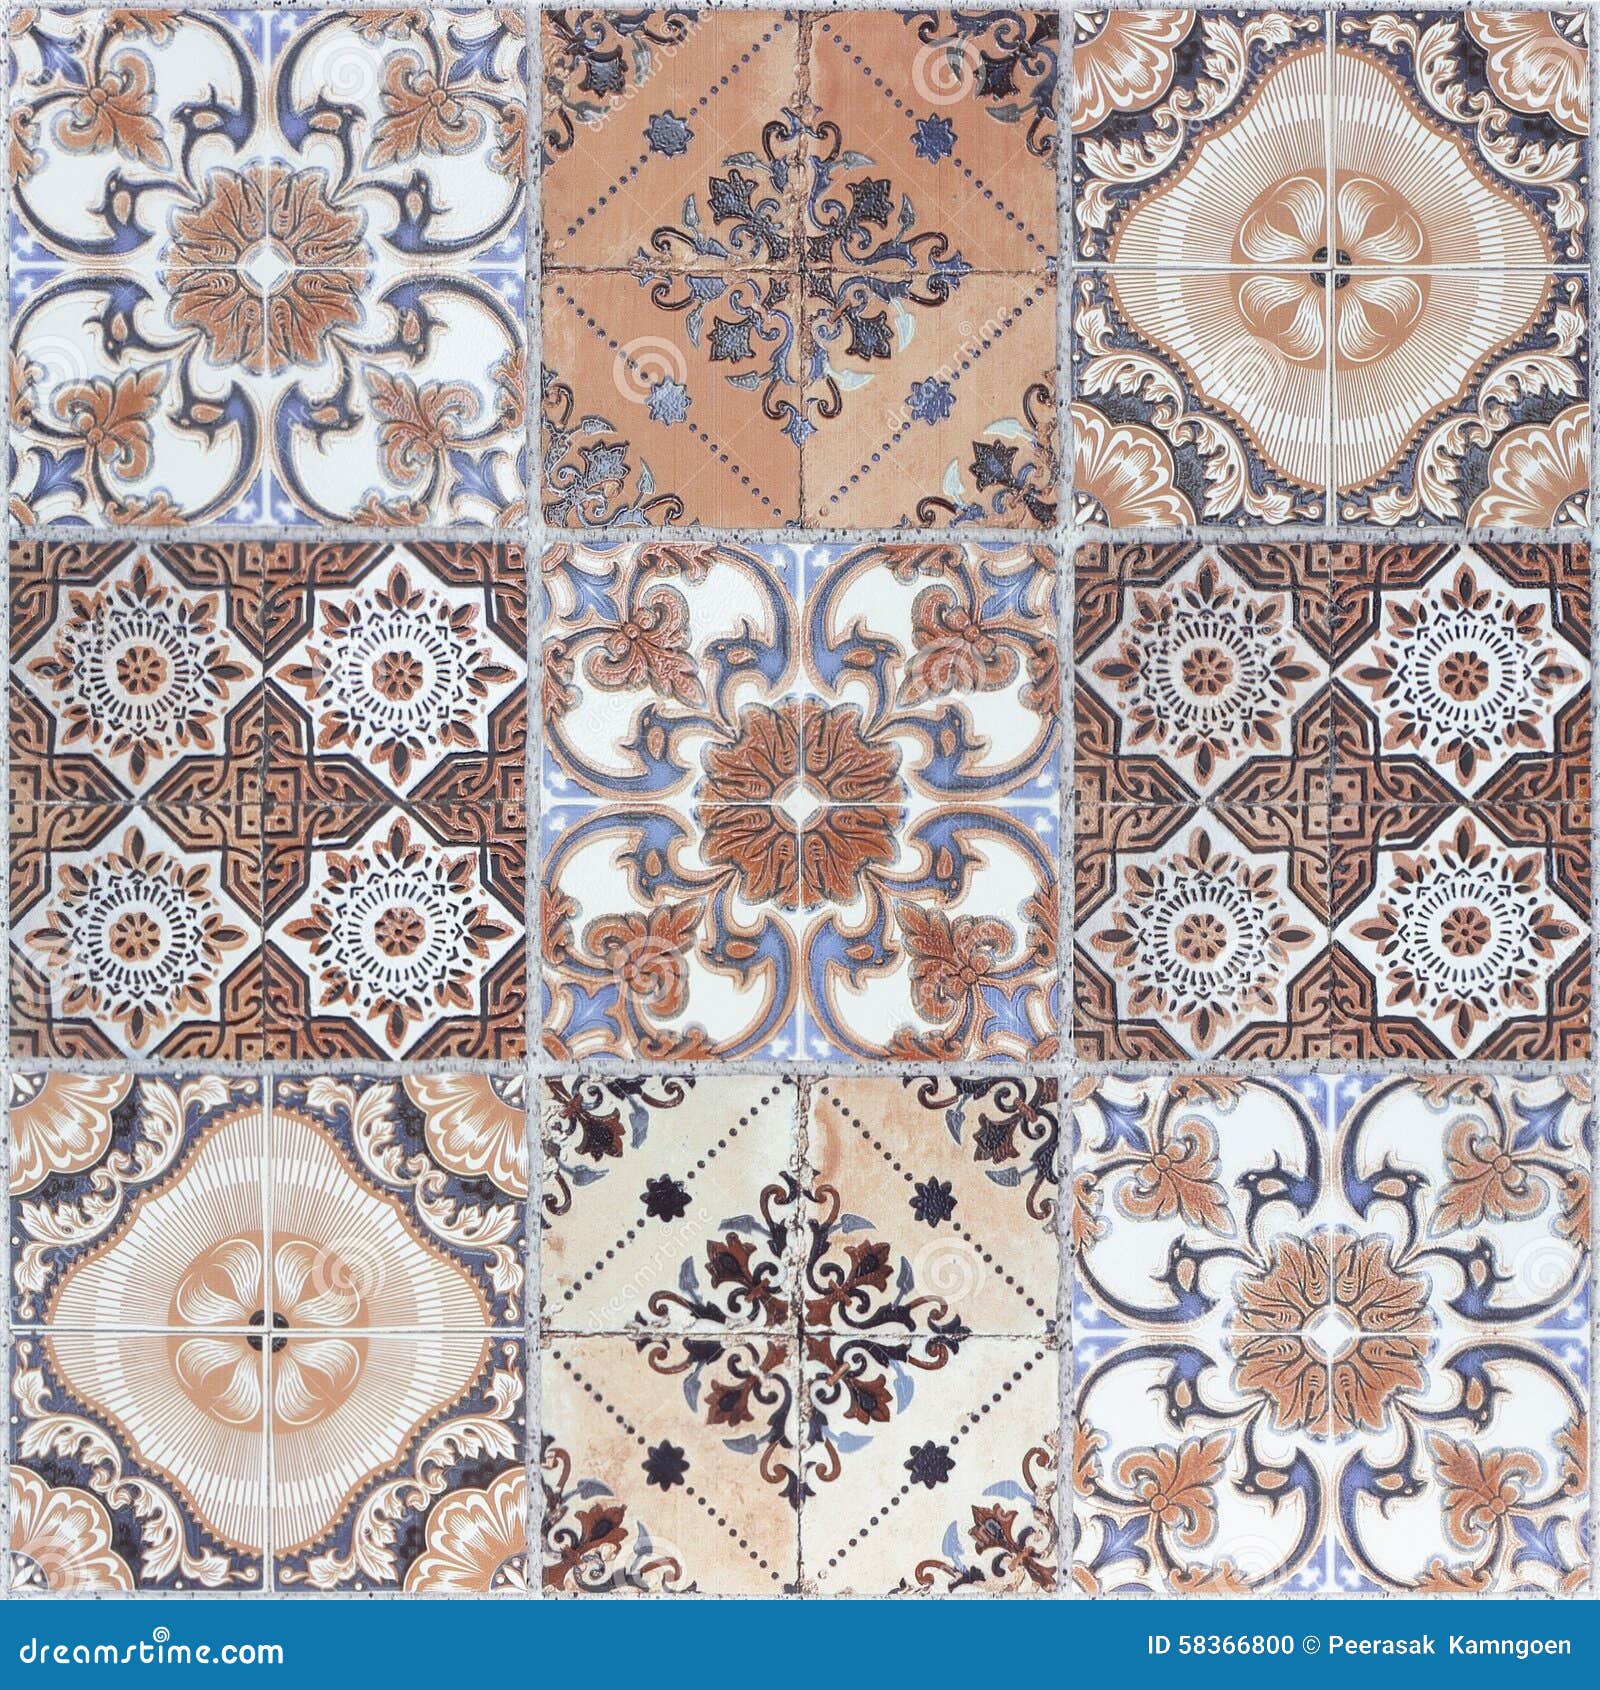 Beautiful Old Wall Ceramic Tiles Patterns Stock Photo Image Of